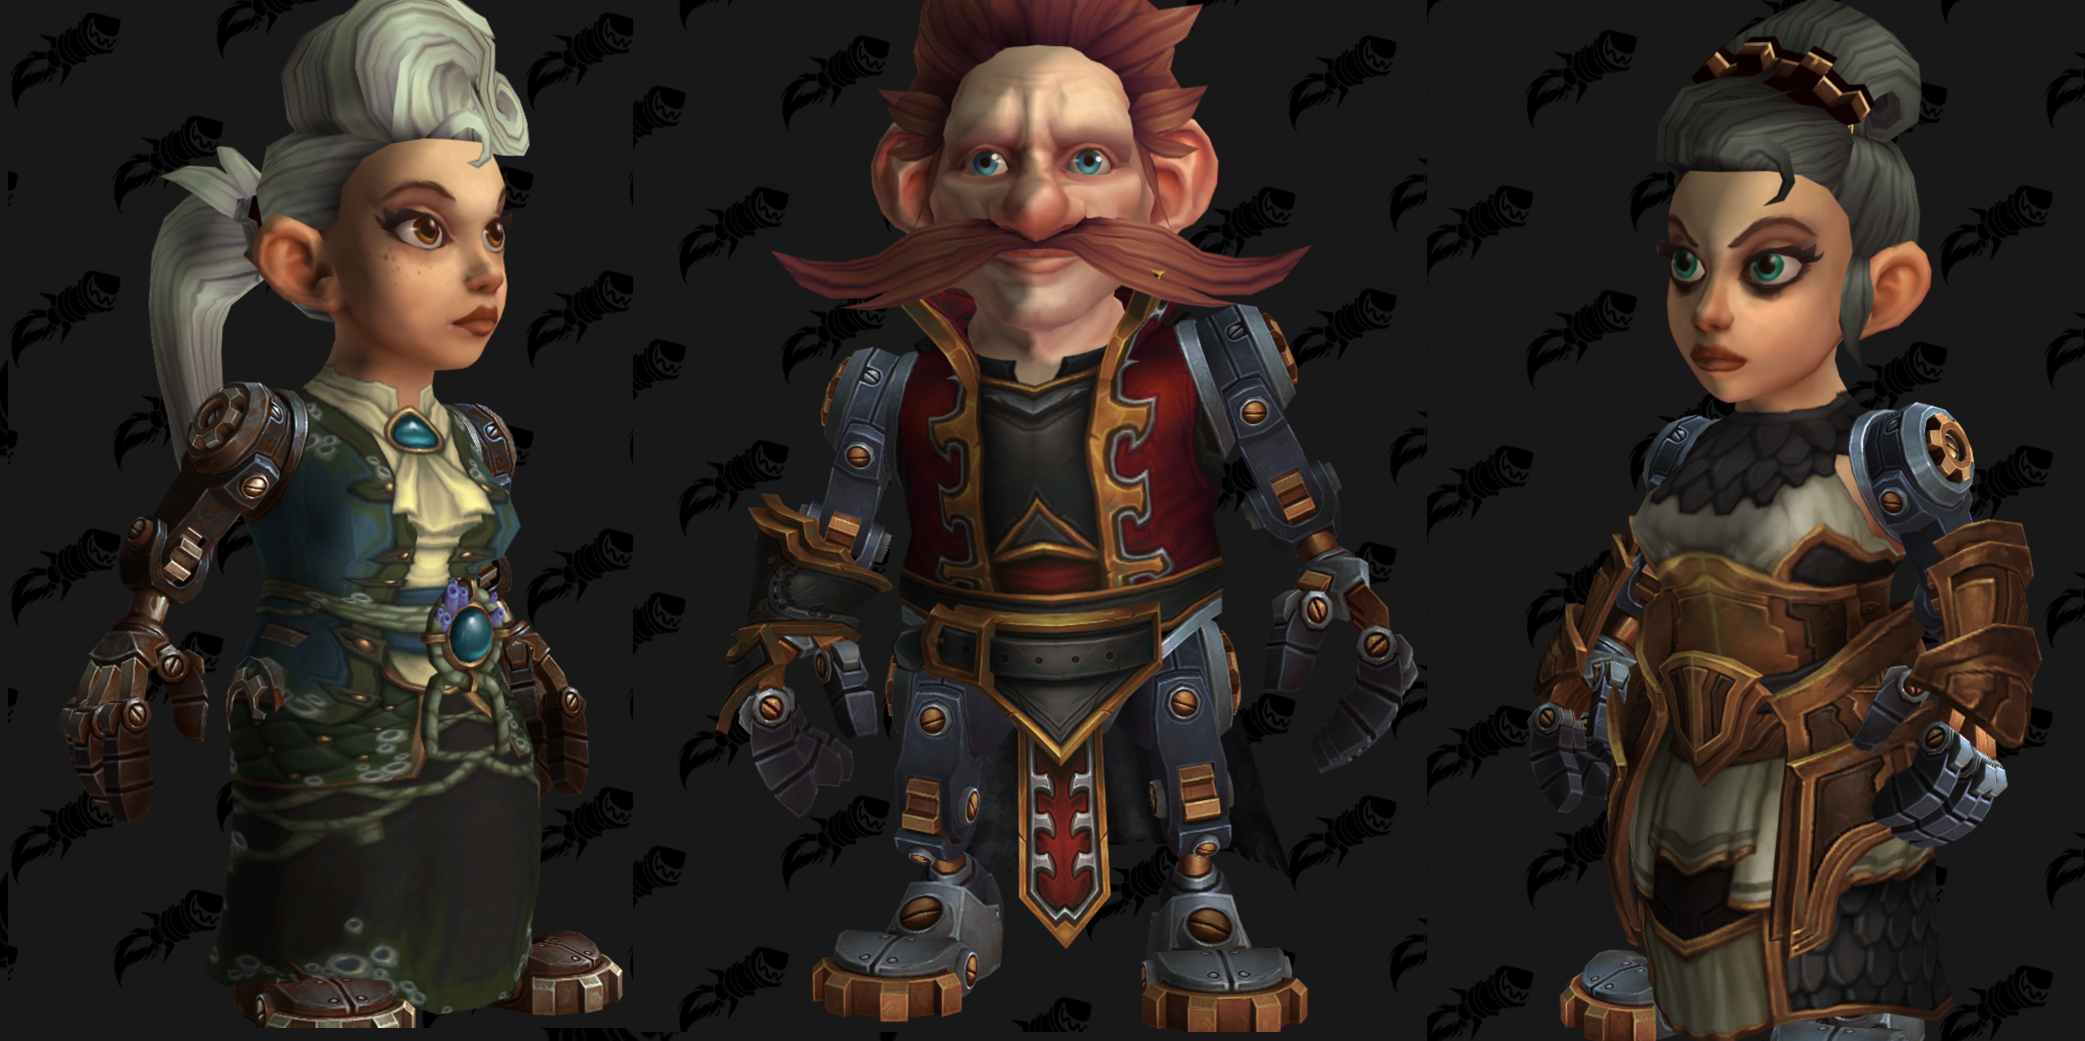 They resemble regular Gnomes--but have mechanical arms and legs as well as ...